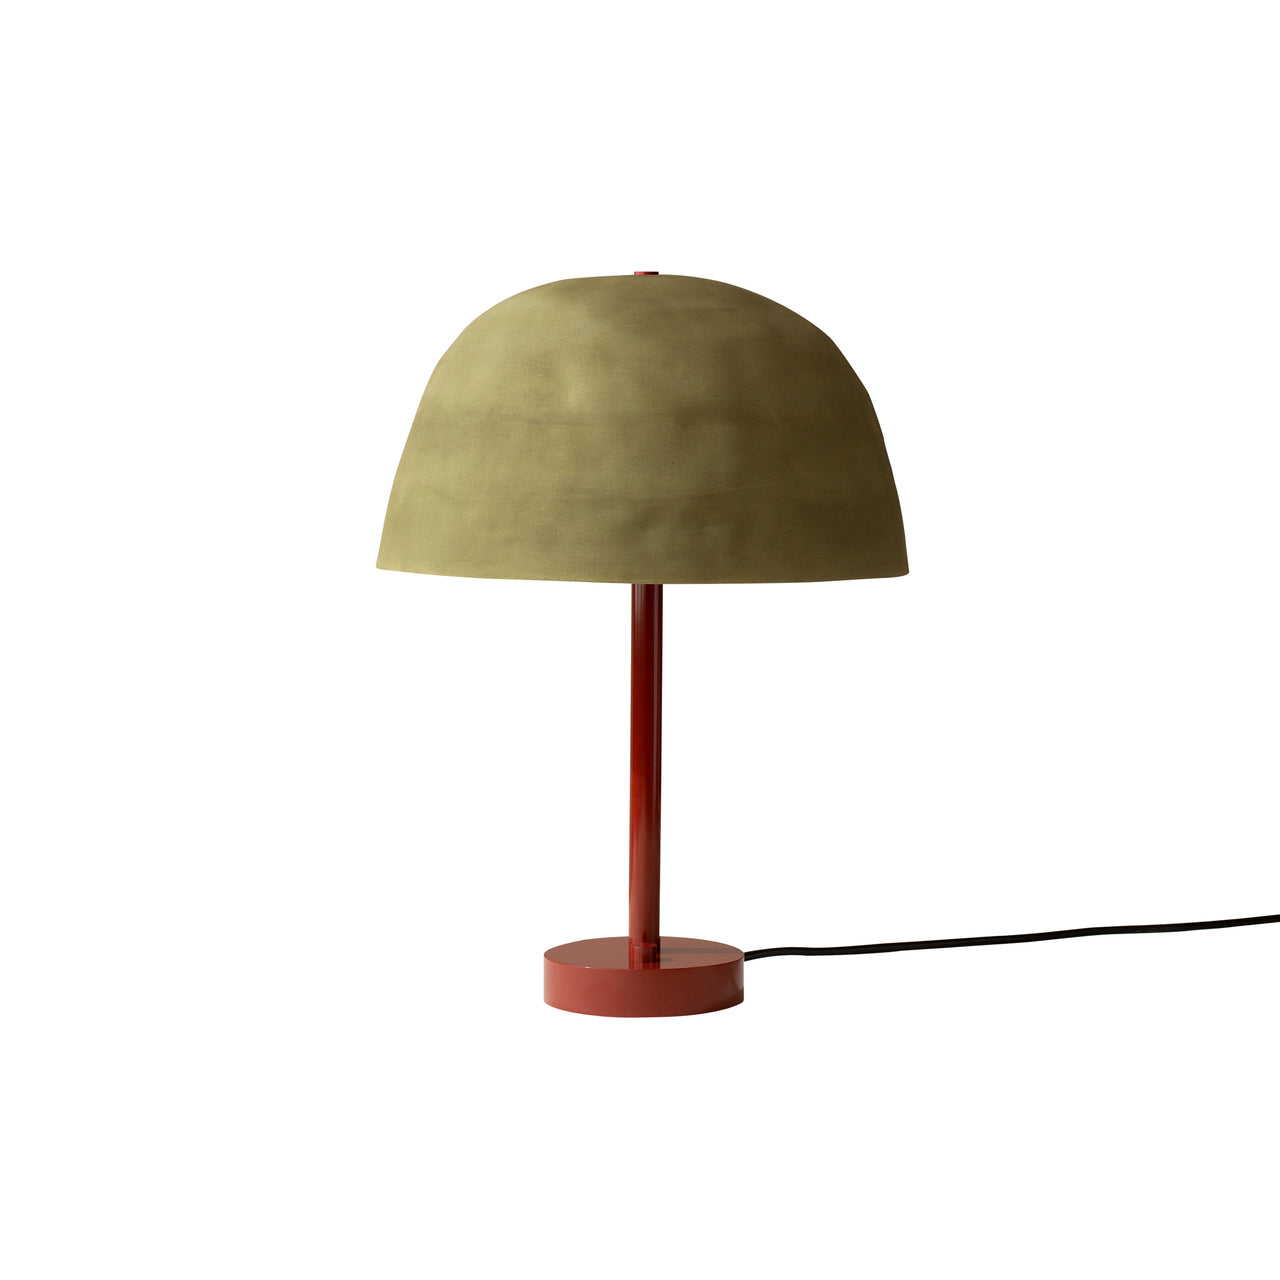 Dome Table Lamp: Green Clay + Oxide Red